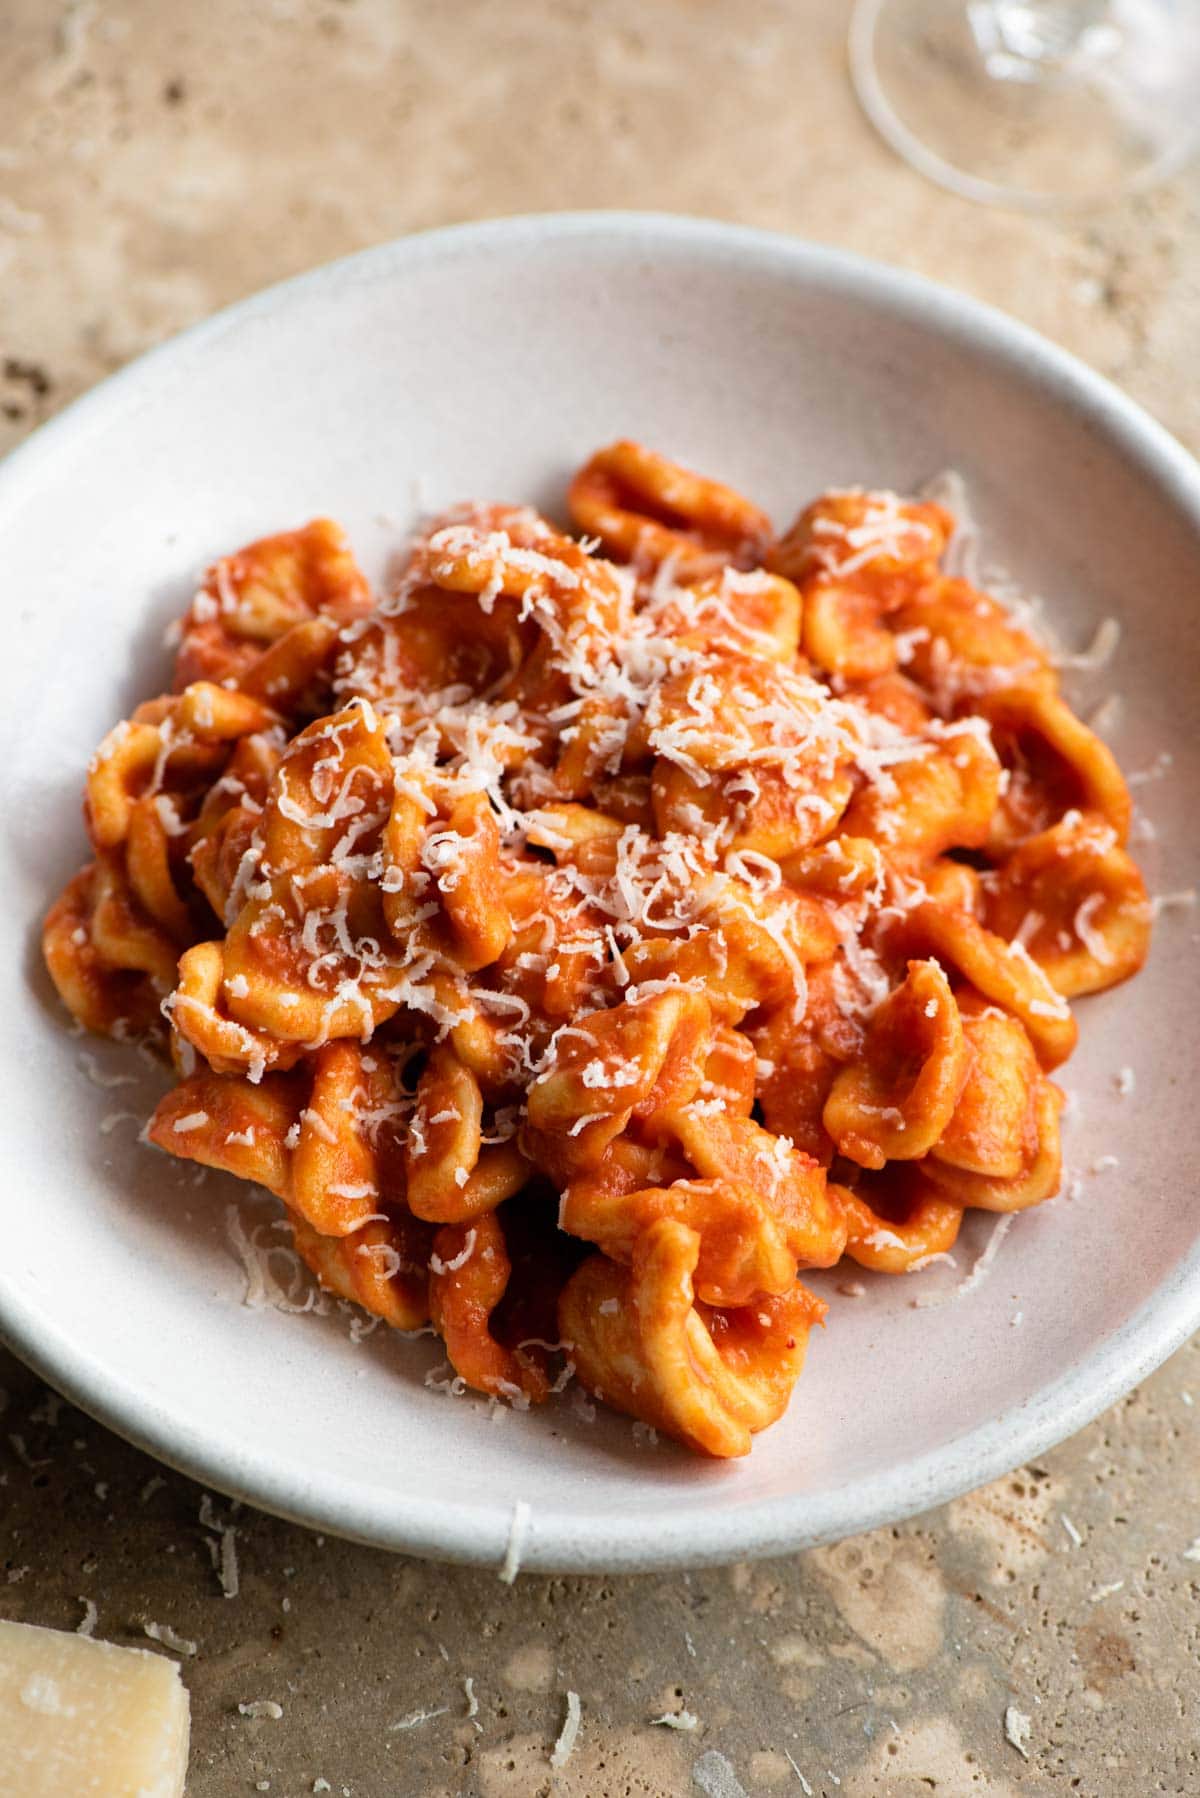 Orecchiette pasta with a creamy tomato sauce in a rustic ceramic bowl topped with cheese